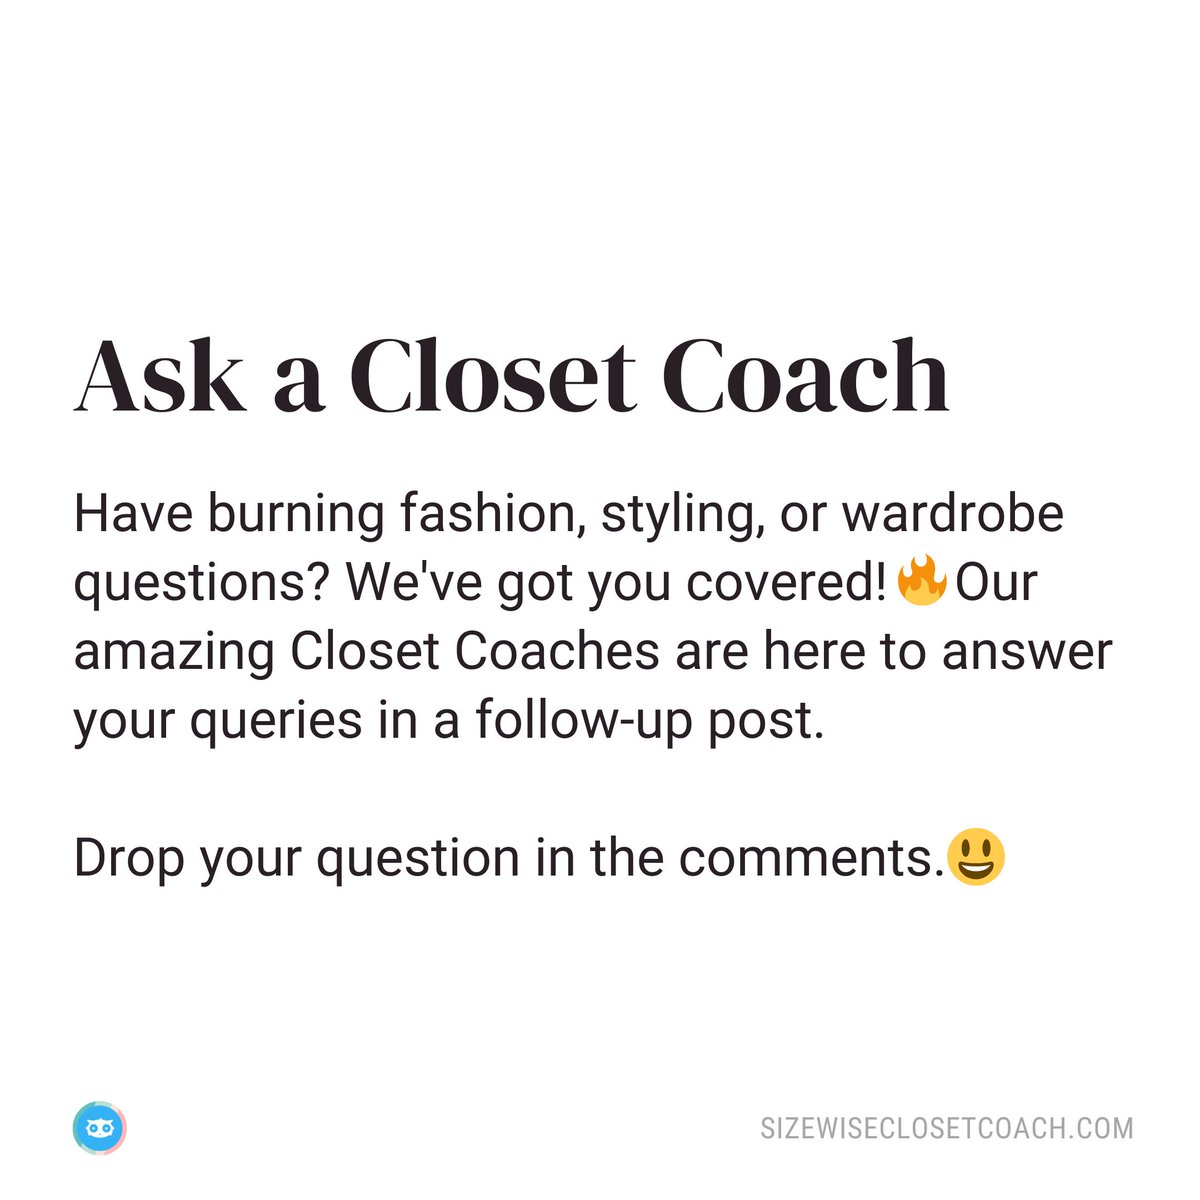 Ask a Closet Coach 🌟

Have burning fashion, styling, or wardrobe questions? We've got you covered! 🔥 Our amazing Coaches are here to answer your queries in a follow-up post. Submit your questions in the comments below.

#AskAClosetCoach #FashionAdvice #StyleTips